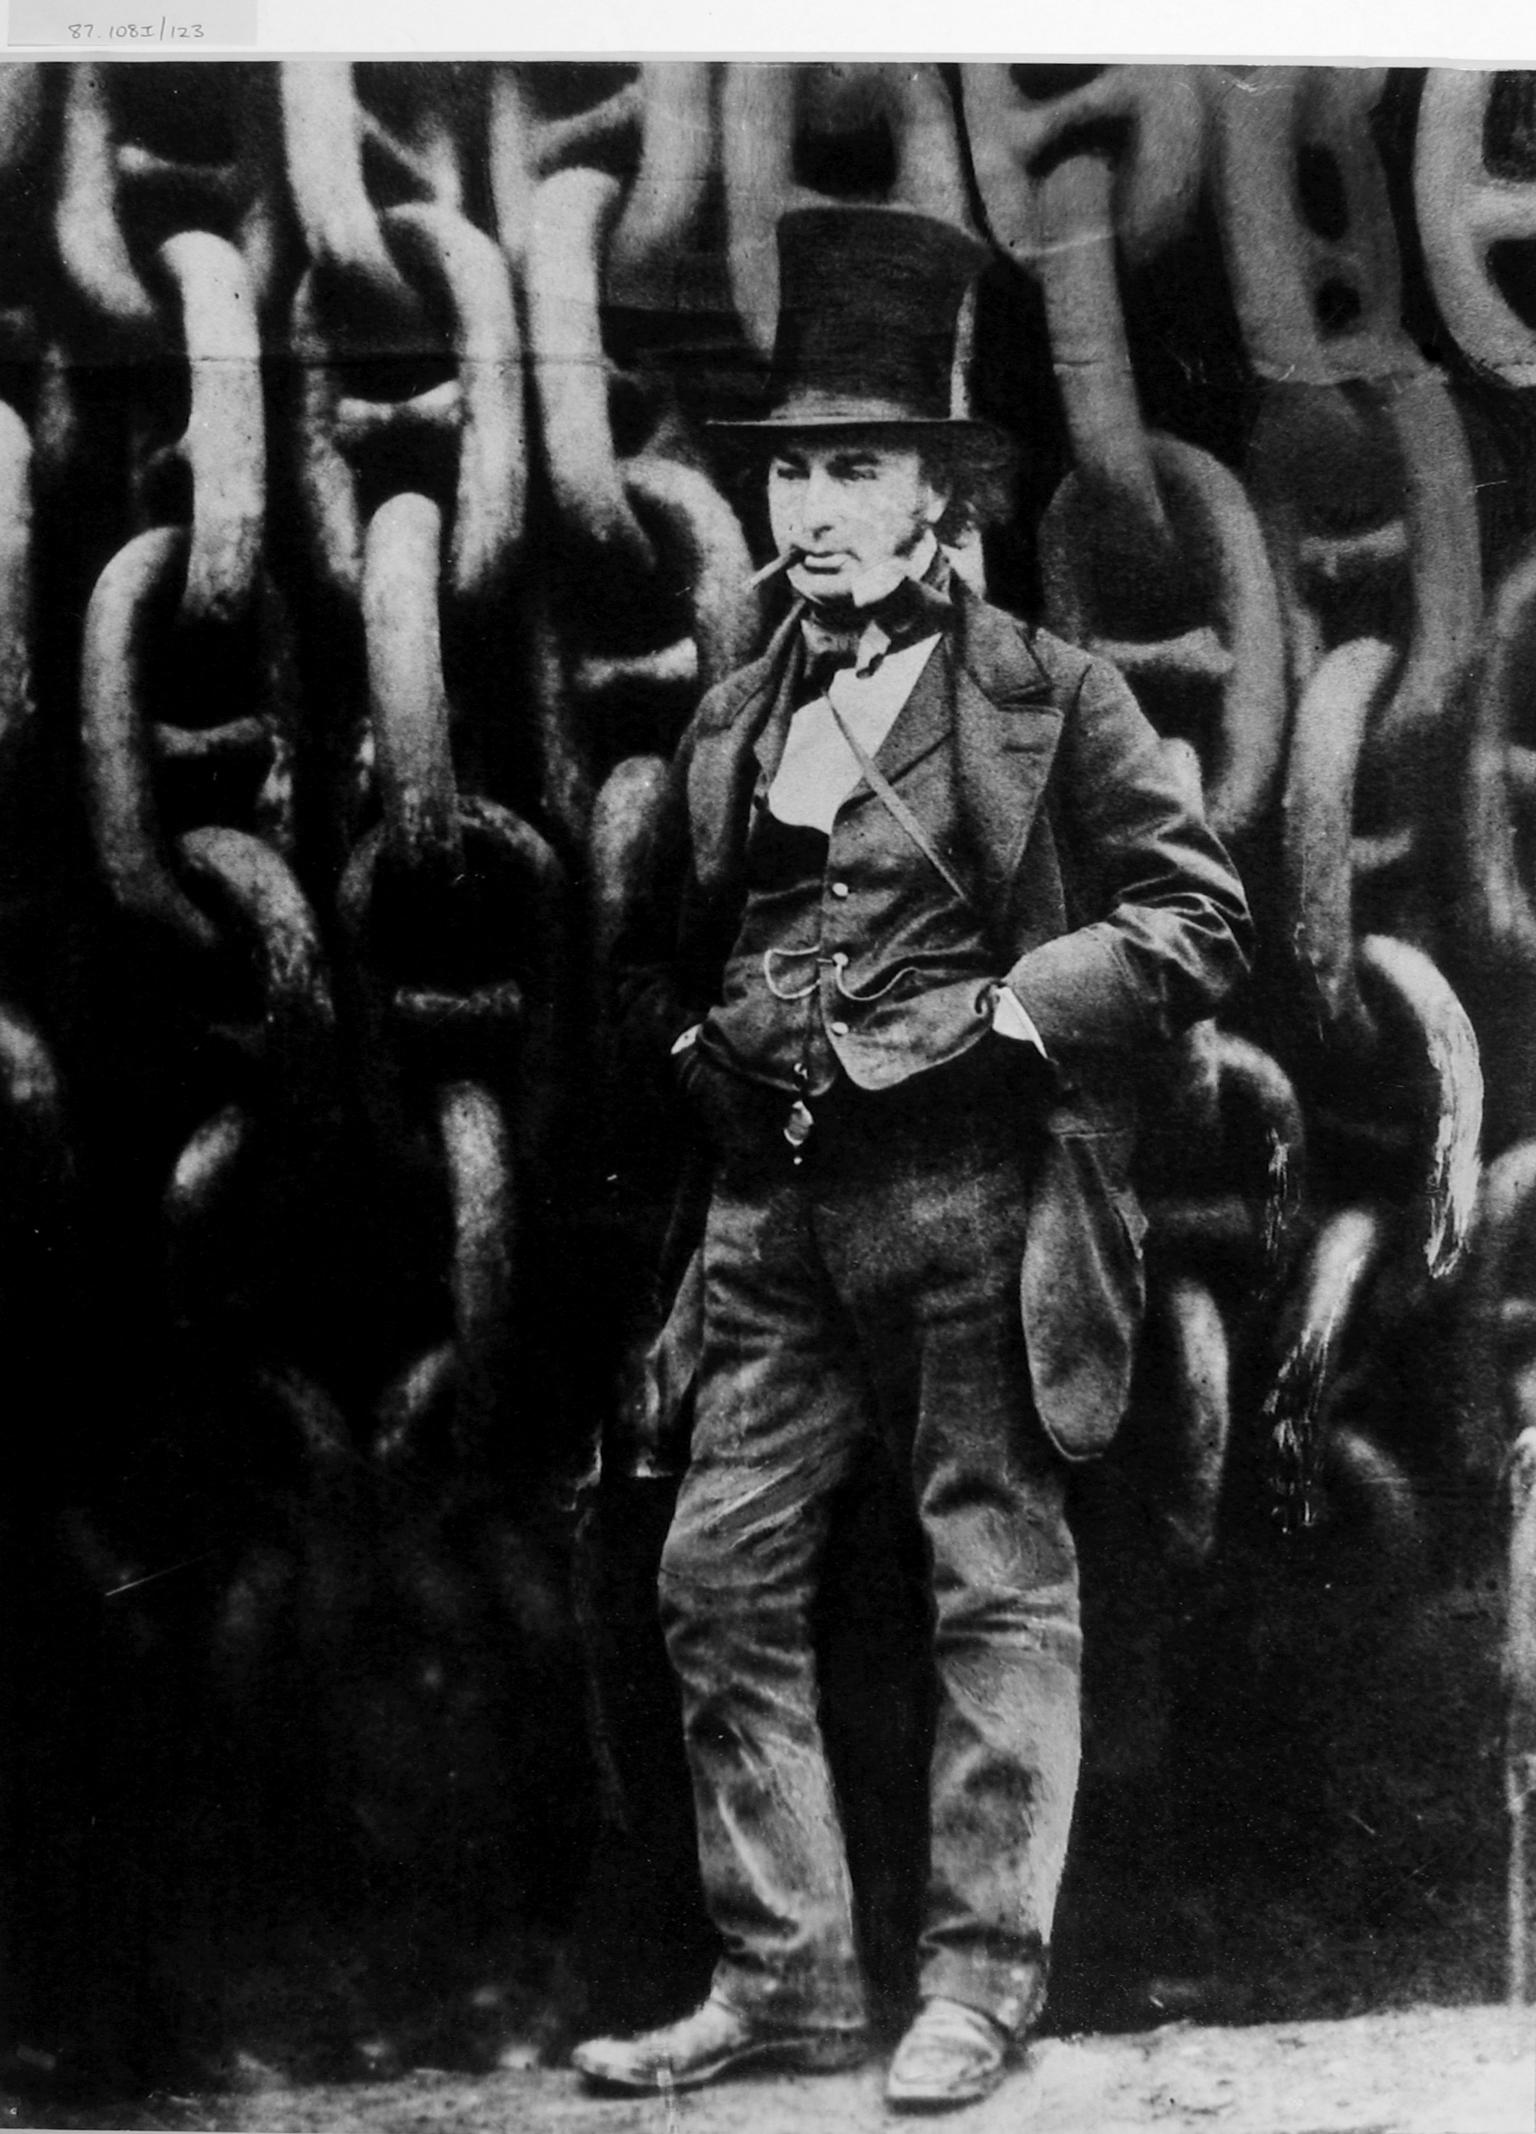 Brunel with chains of the Great Eastern, photograph